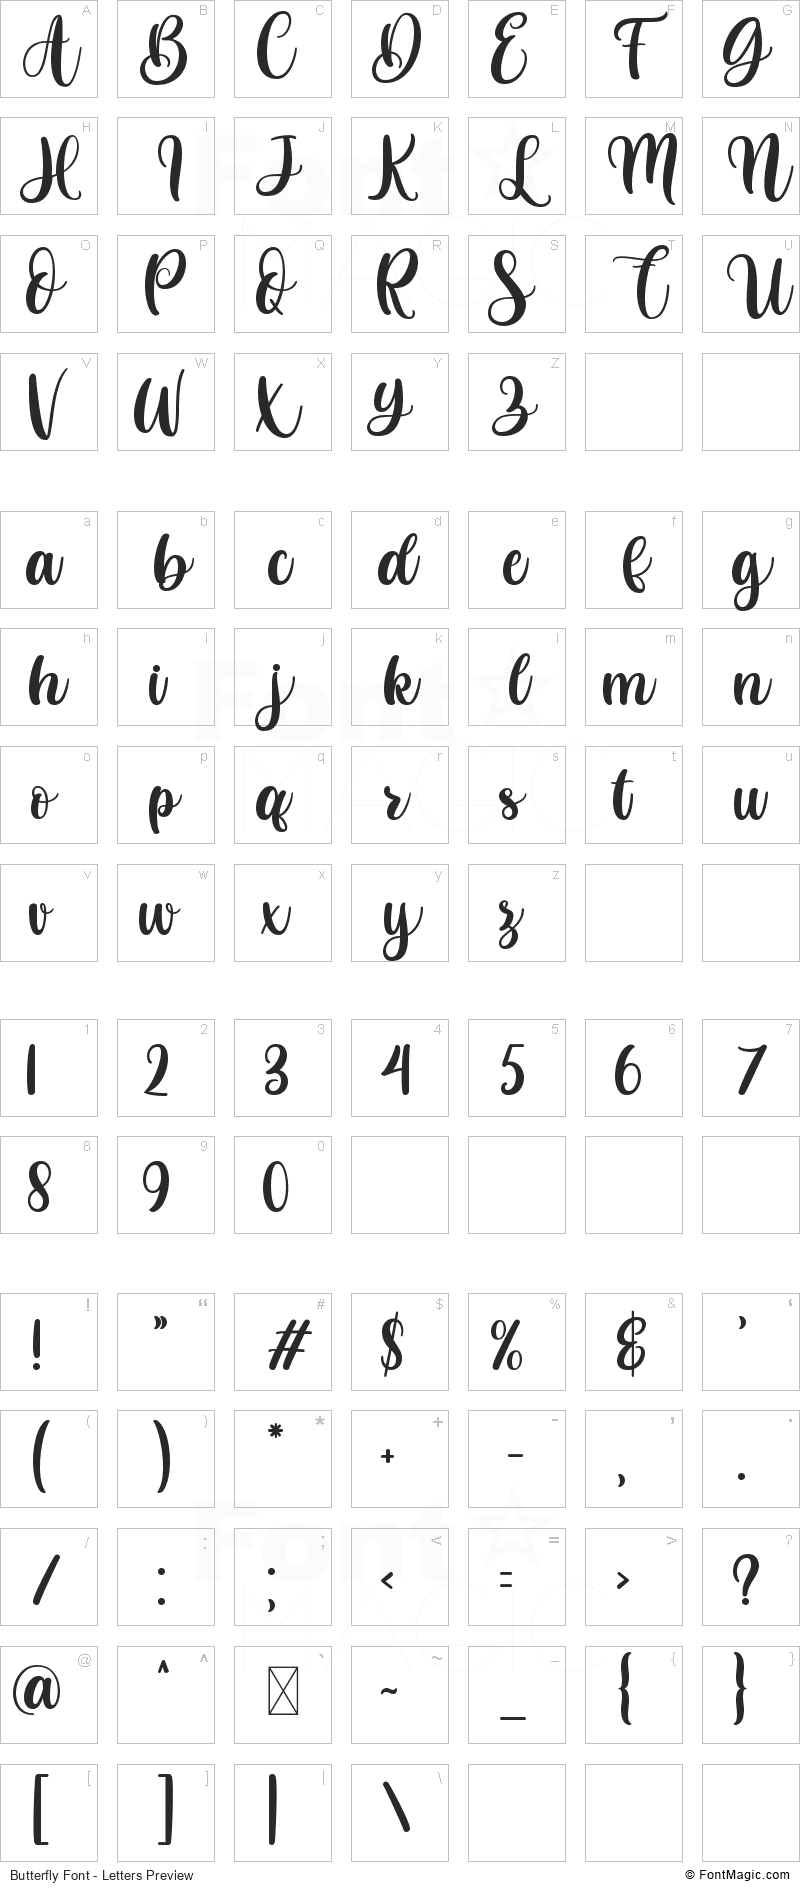 Butterfly Font - All Latters Preview Chart